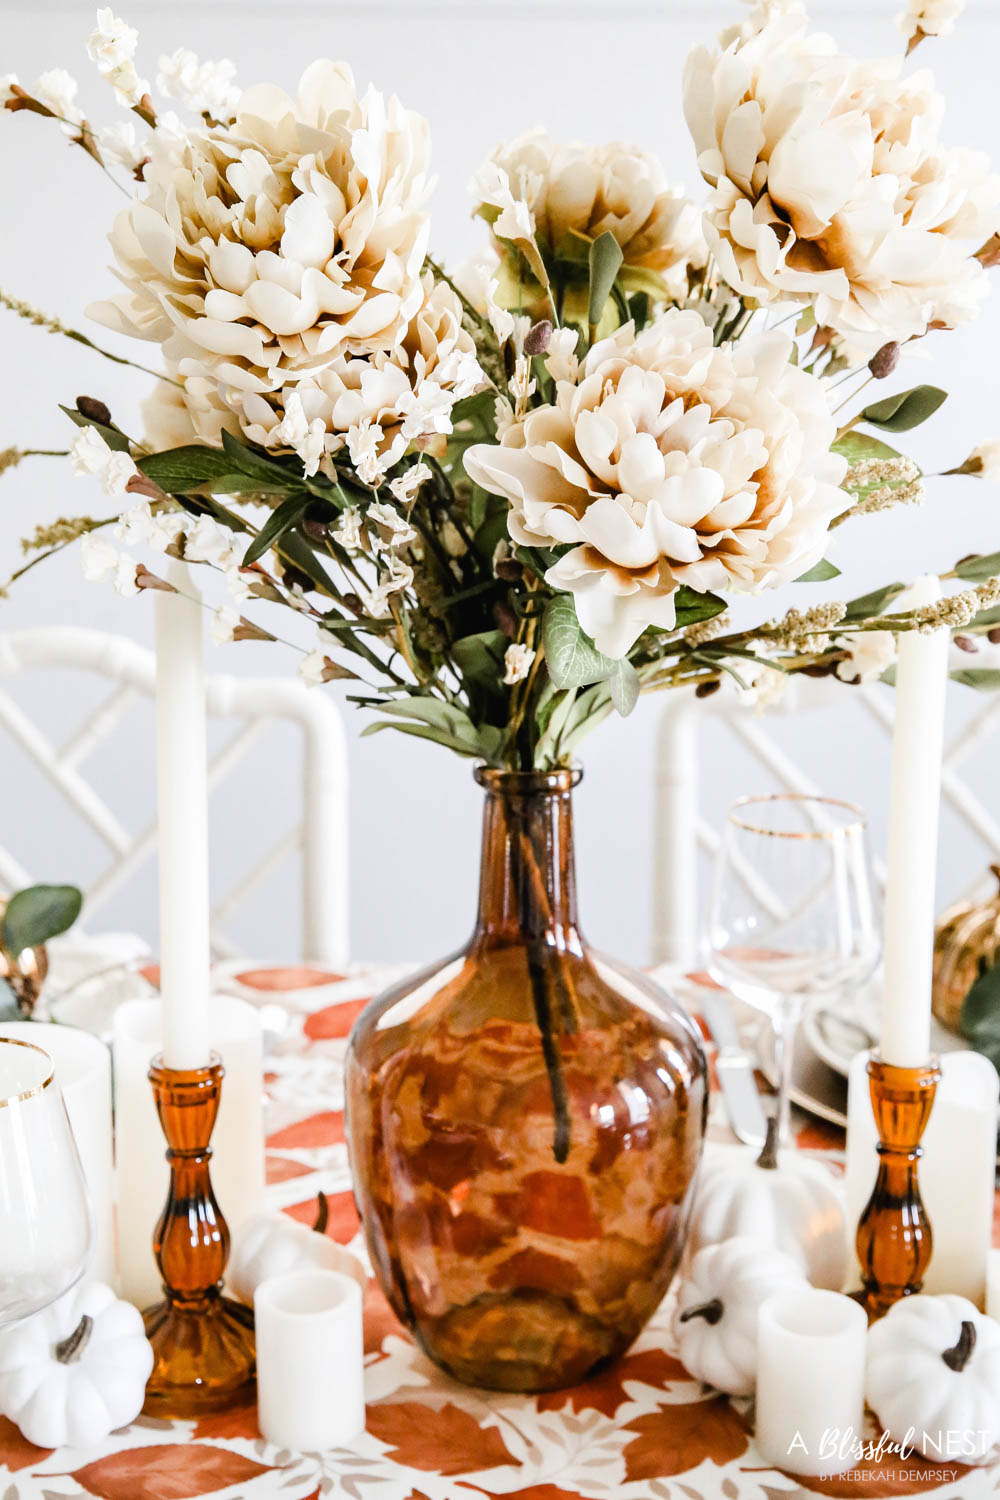 Amber colored vase with ivory colored flowers in the center of the table